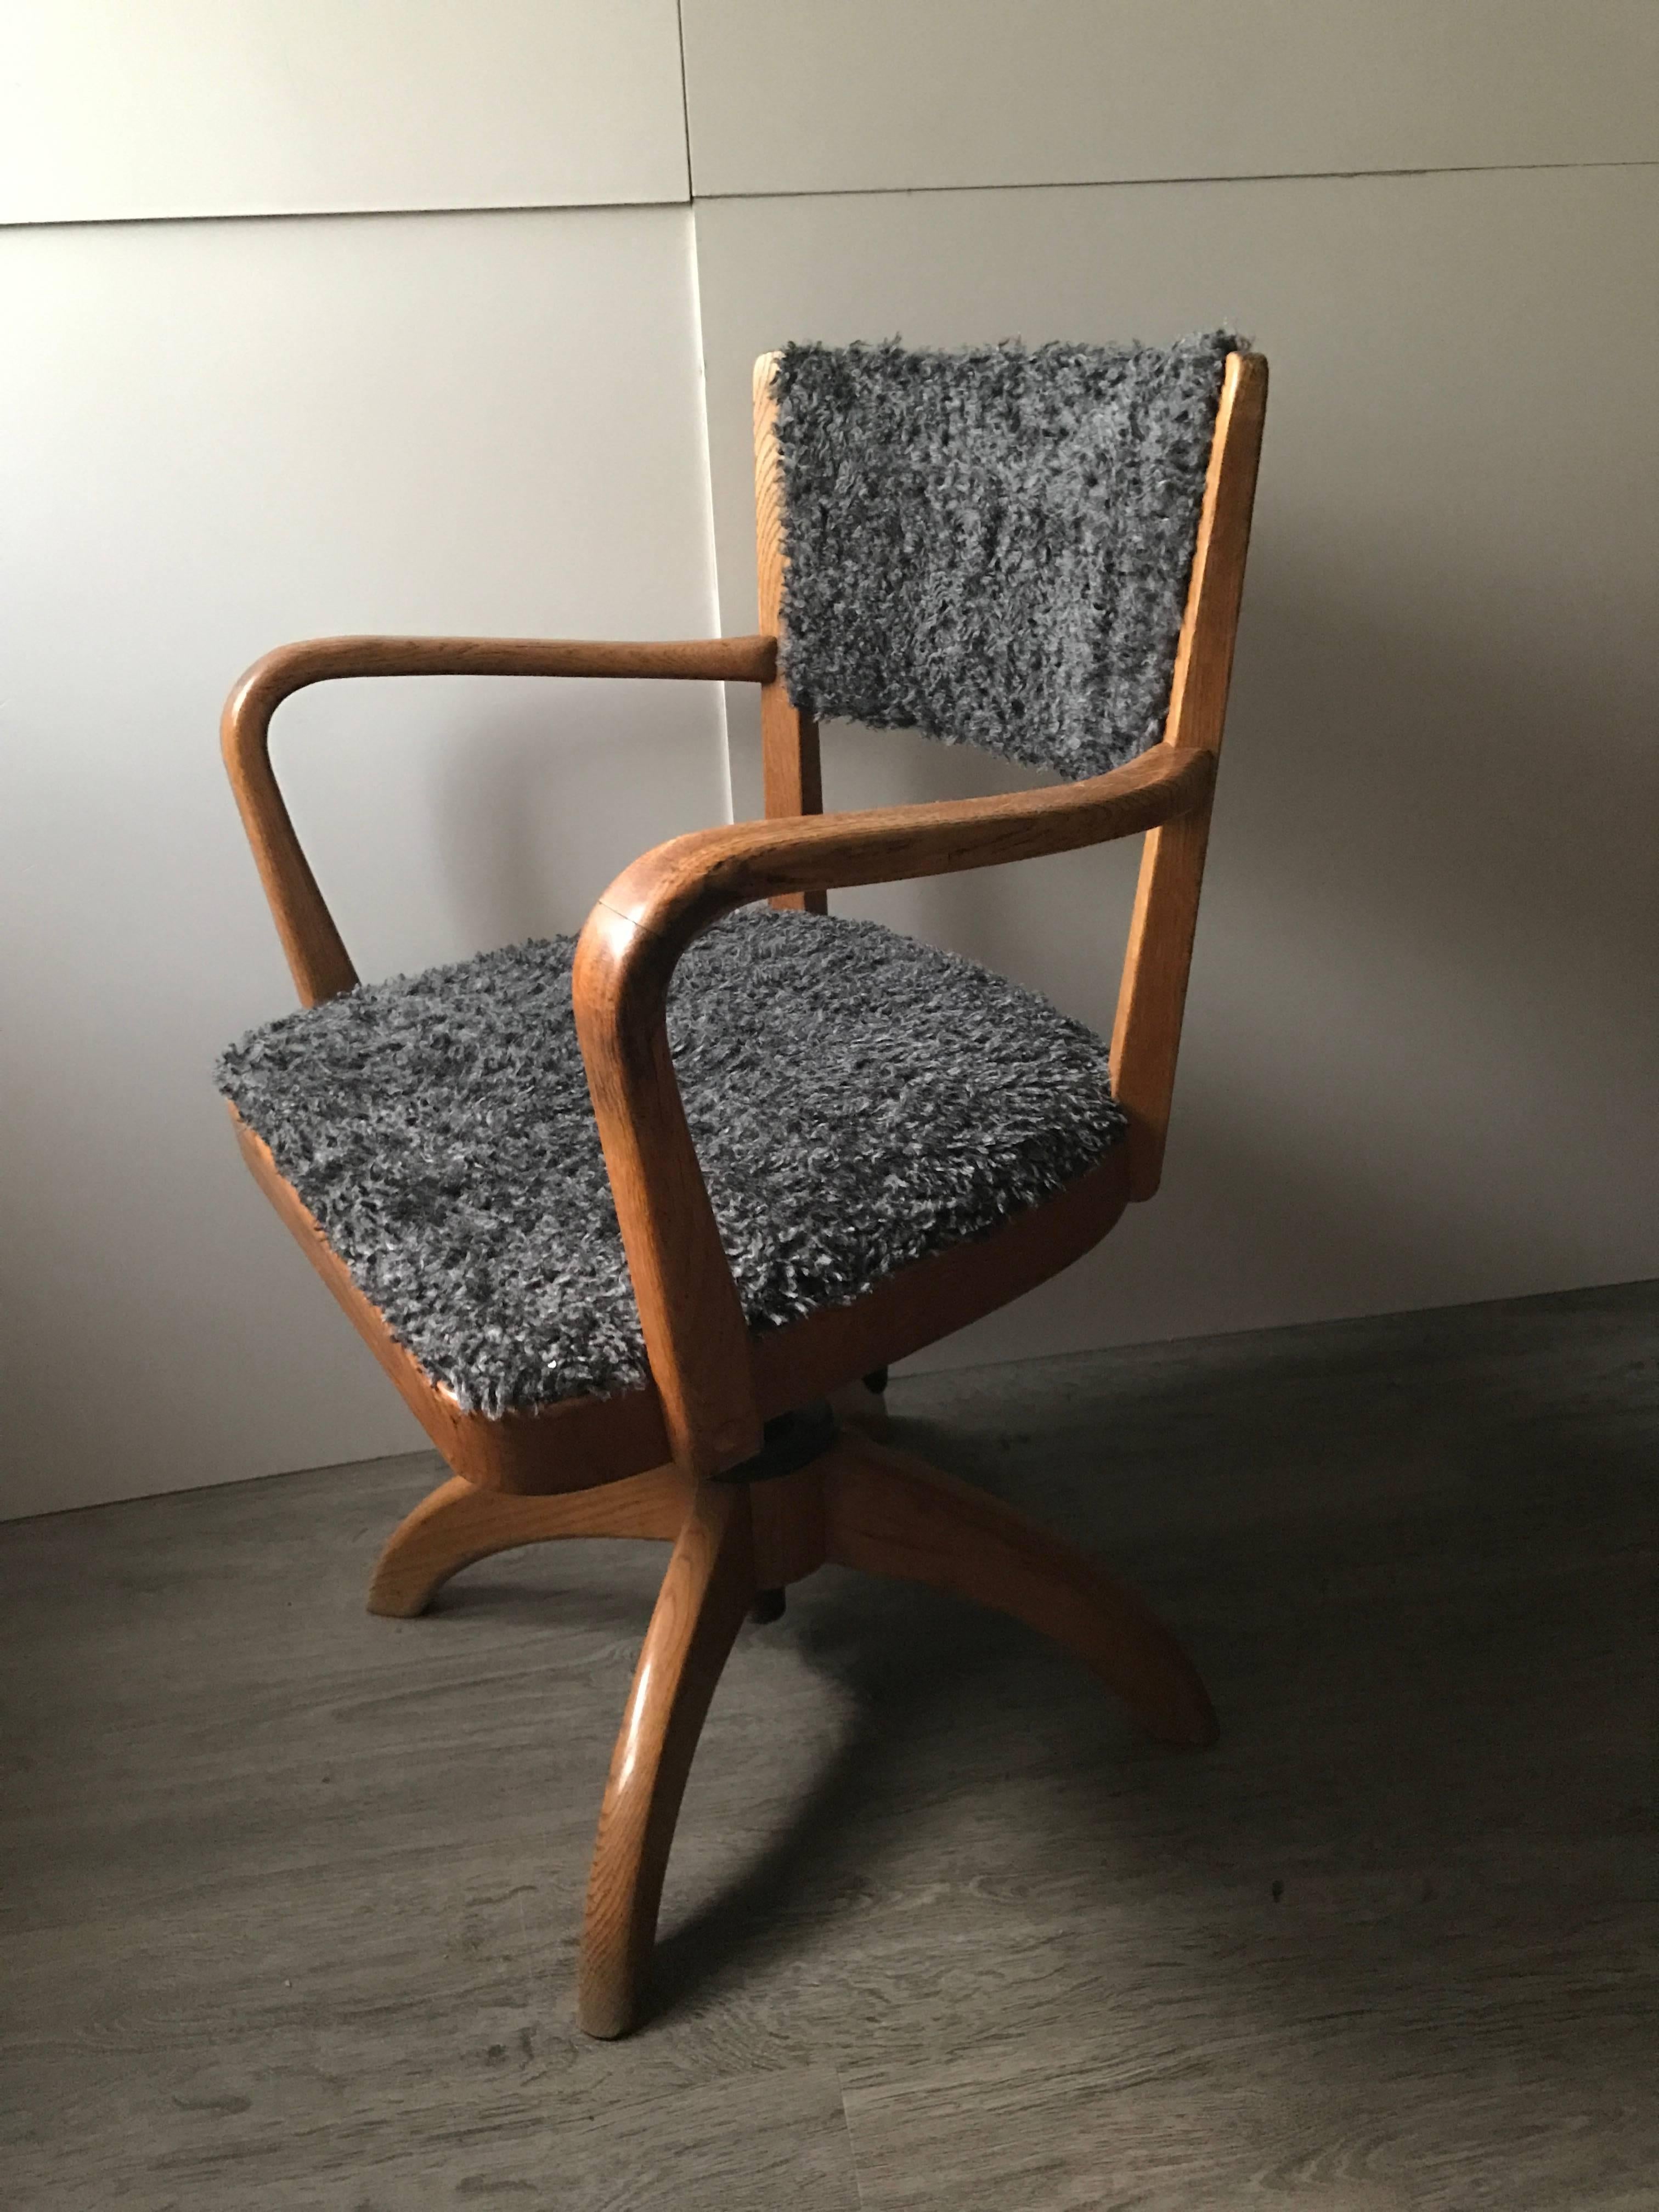 A beautifully shaped Swedish Art Deco oak office chair with faux sheep fur covering both the seat and the back. It has a tilting function and can also be adjusted in height. The chair is in a fantastic condition and has not any damages or